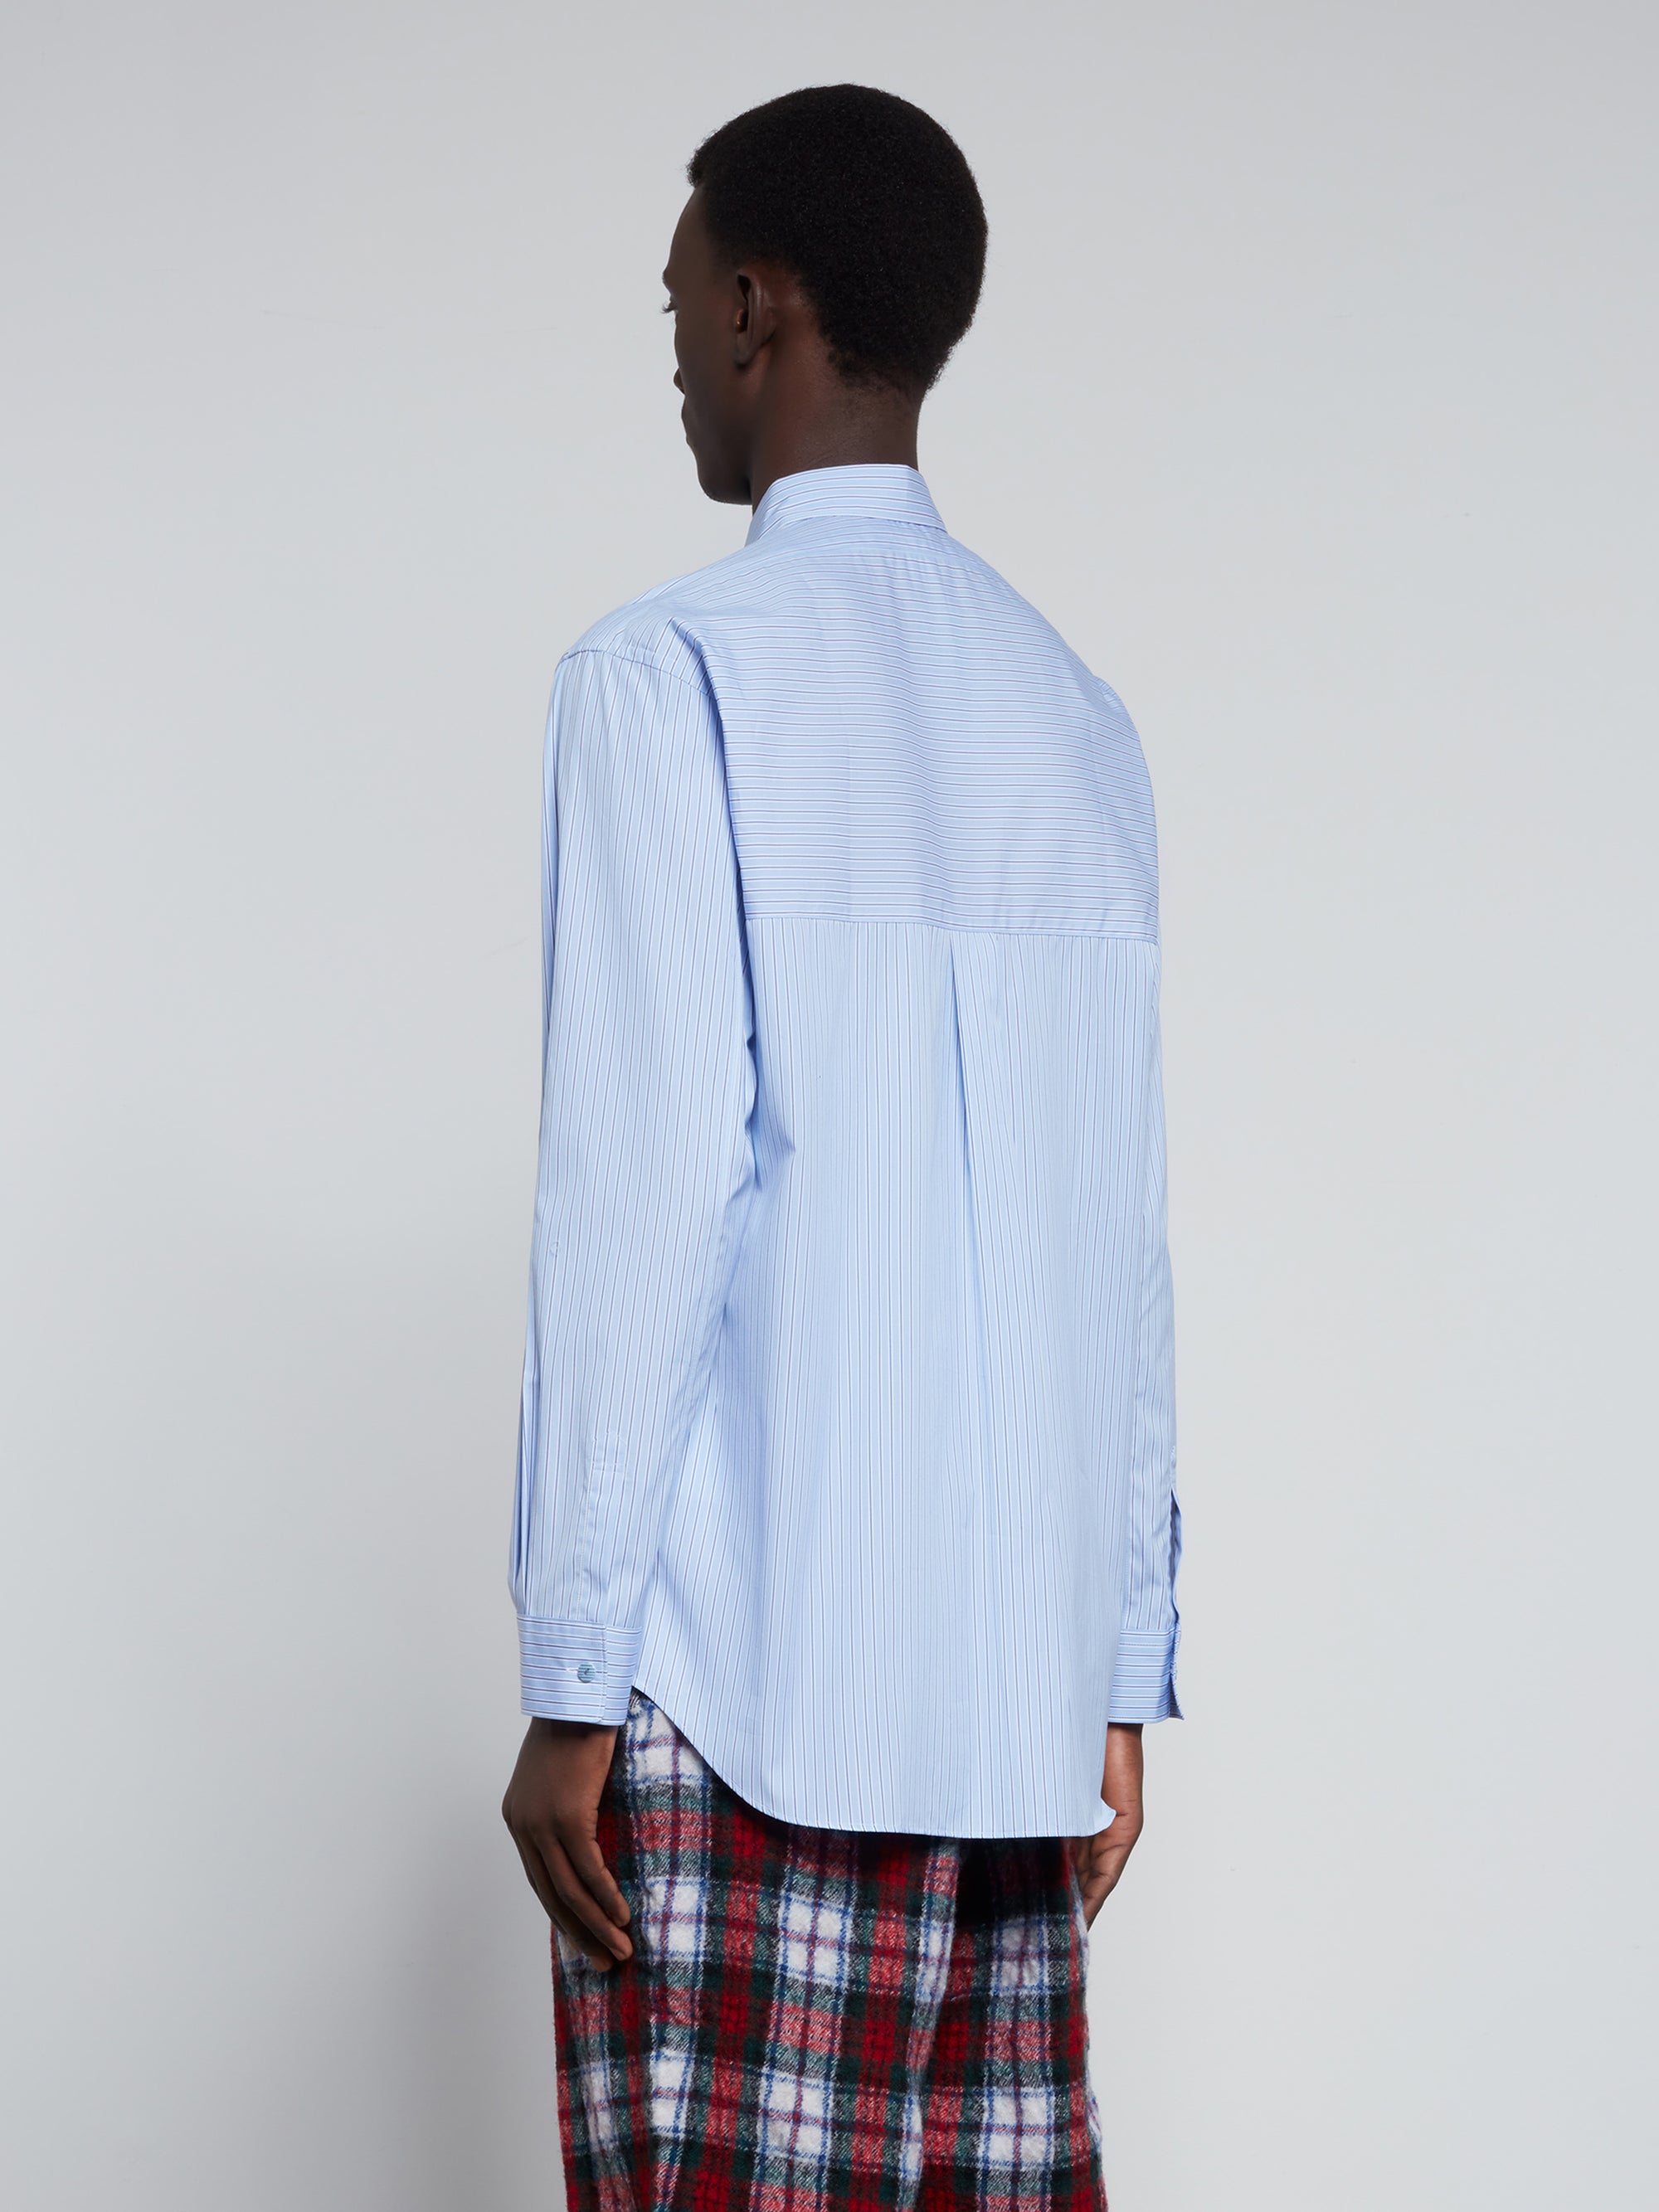 CDG Shirt Forever - Classic Fit Woven Cotton Shirt - (Blue Stripe) view 3